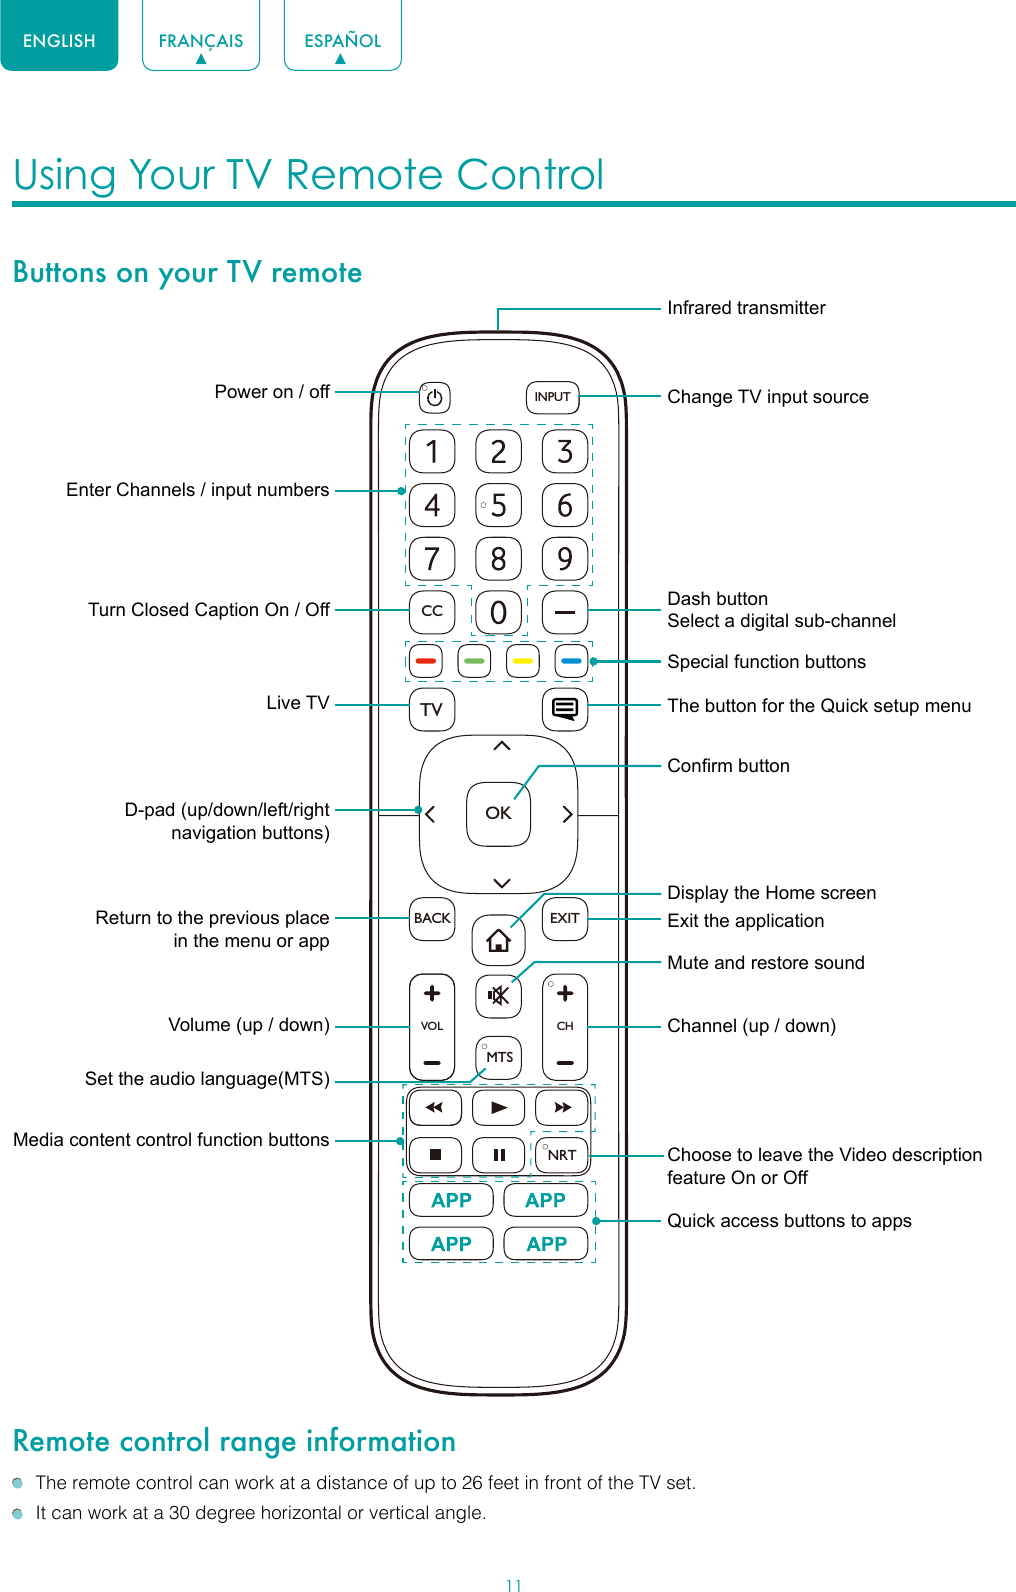 11ENGLISH FRANÇAIS ESPAÑOLUsing Your TV Remote Control Buttons on your TV remoteRemote control range information  The remote control can work at a distance of up to 26 feet in front of the TV set.  It can work at a 30 degree horizontal or vertical angle.VOLCHOKCCBACKTVEXITINPUTMTSNRTPower on / offEnter Channels / input numbersMedia content control function buttonsDash button Select a digital sub-channelD-pad (up/down/left/right navigation buttons)Volume (up / down)Set the audio language(MTS)Choose to leave the Video description feature On or OffLive TVReturn to the previous place in the menu or appMute and restore soundInfrared transmitterChange TV input sourceChannel (up / down)Exit the applicationTurn Closed Caption On / OffSpecial function buttonsThe button for the Quick setup menuDisplay the Home screenConrm buttonQuick access buttons to apps